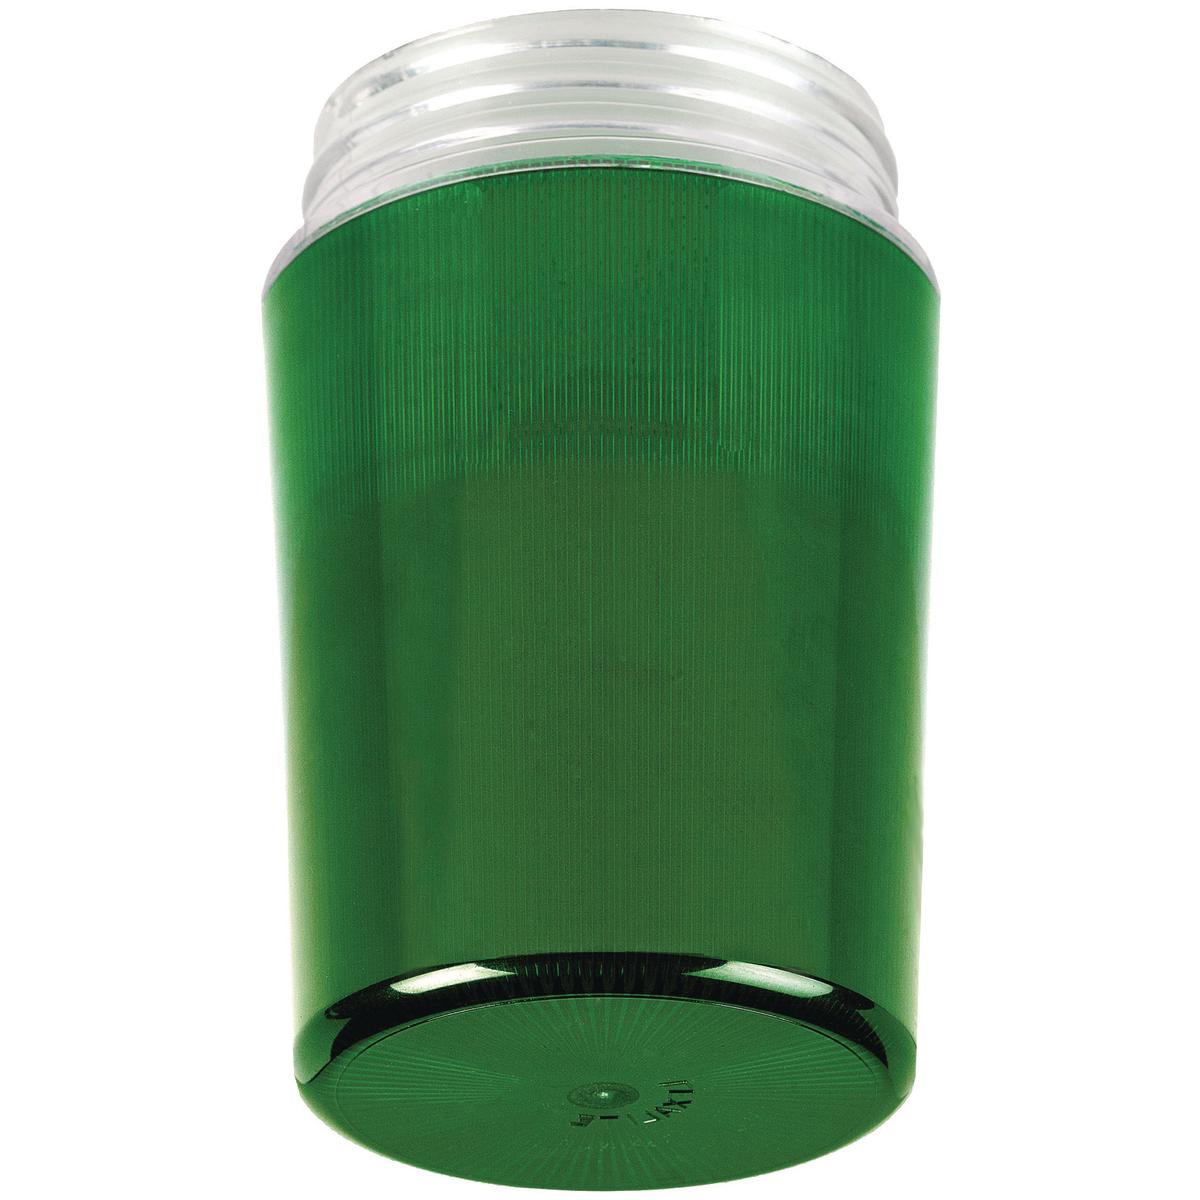 Hubbell VPLCG-100G V Series - Polycarbonate Green Globe - 75 W A-19 Lamp  ; Electrostatically applied epoxy/polyester finish ; Modular design ; Hubs are threaded for attachment to conduit ; Set screws in pendant fixture ; Copper-free aluminum (less than .004%) ; The V Serie